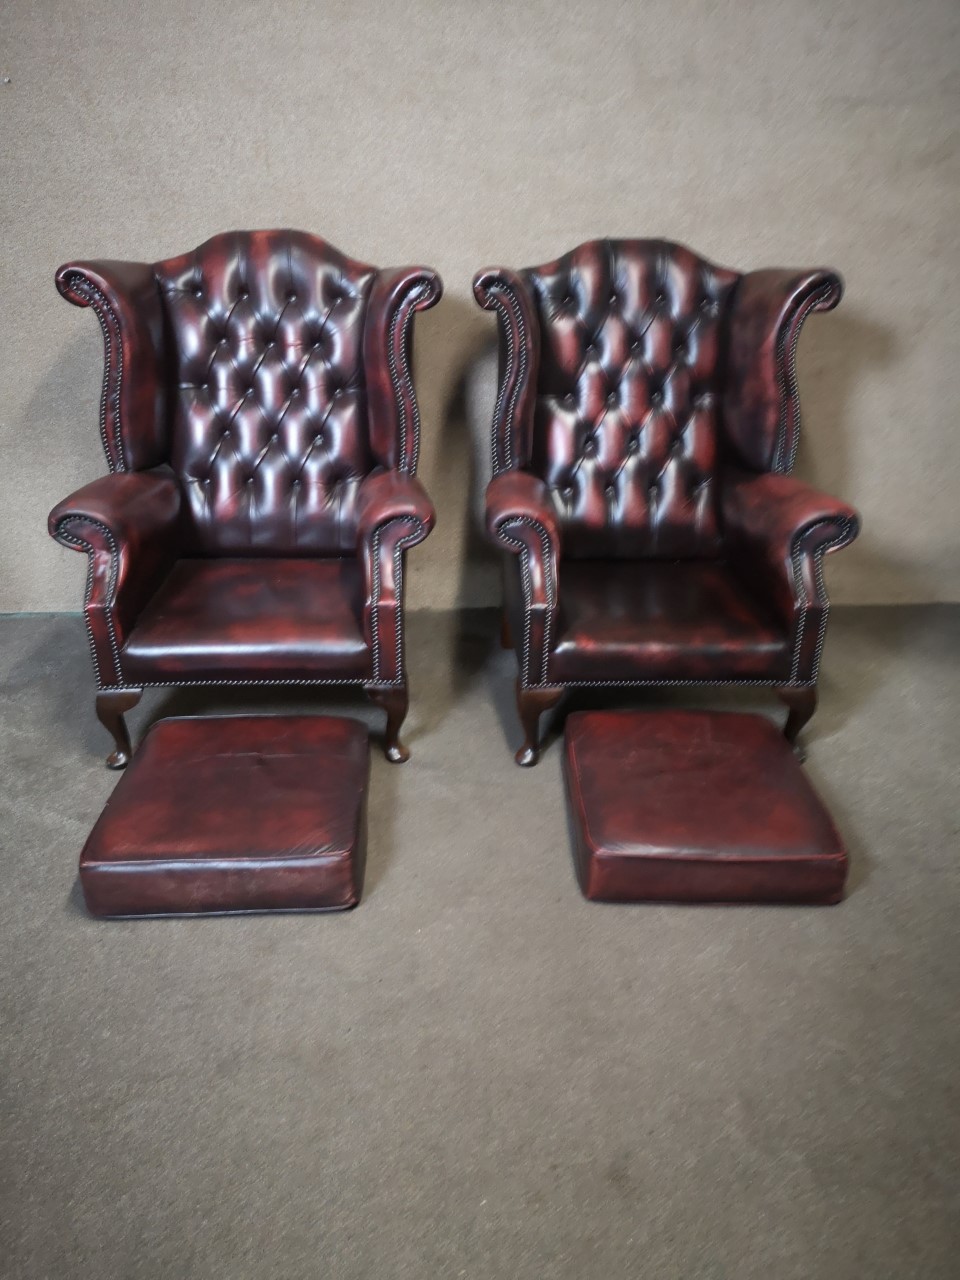 Chesterfield suite  1) Pair of Queen Anne chairs画像